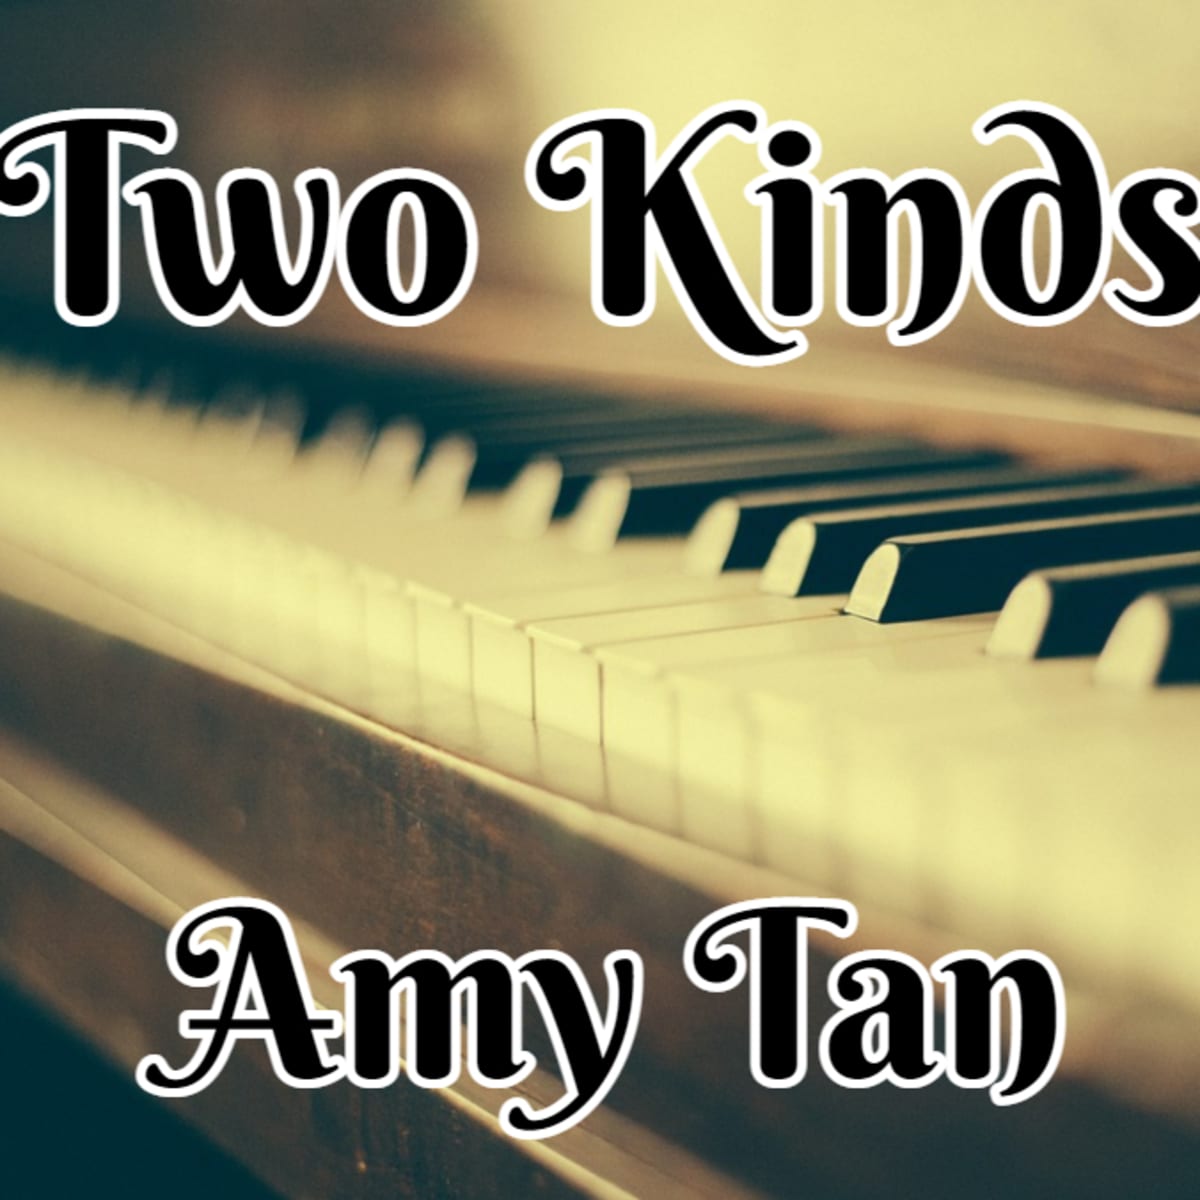 literary analysis of two kinds by amy tan